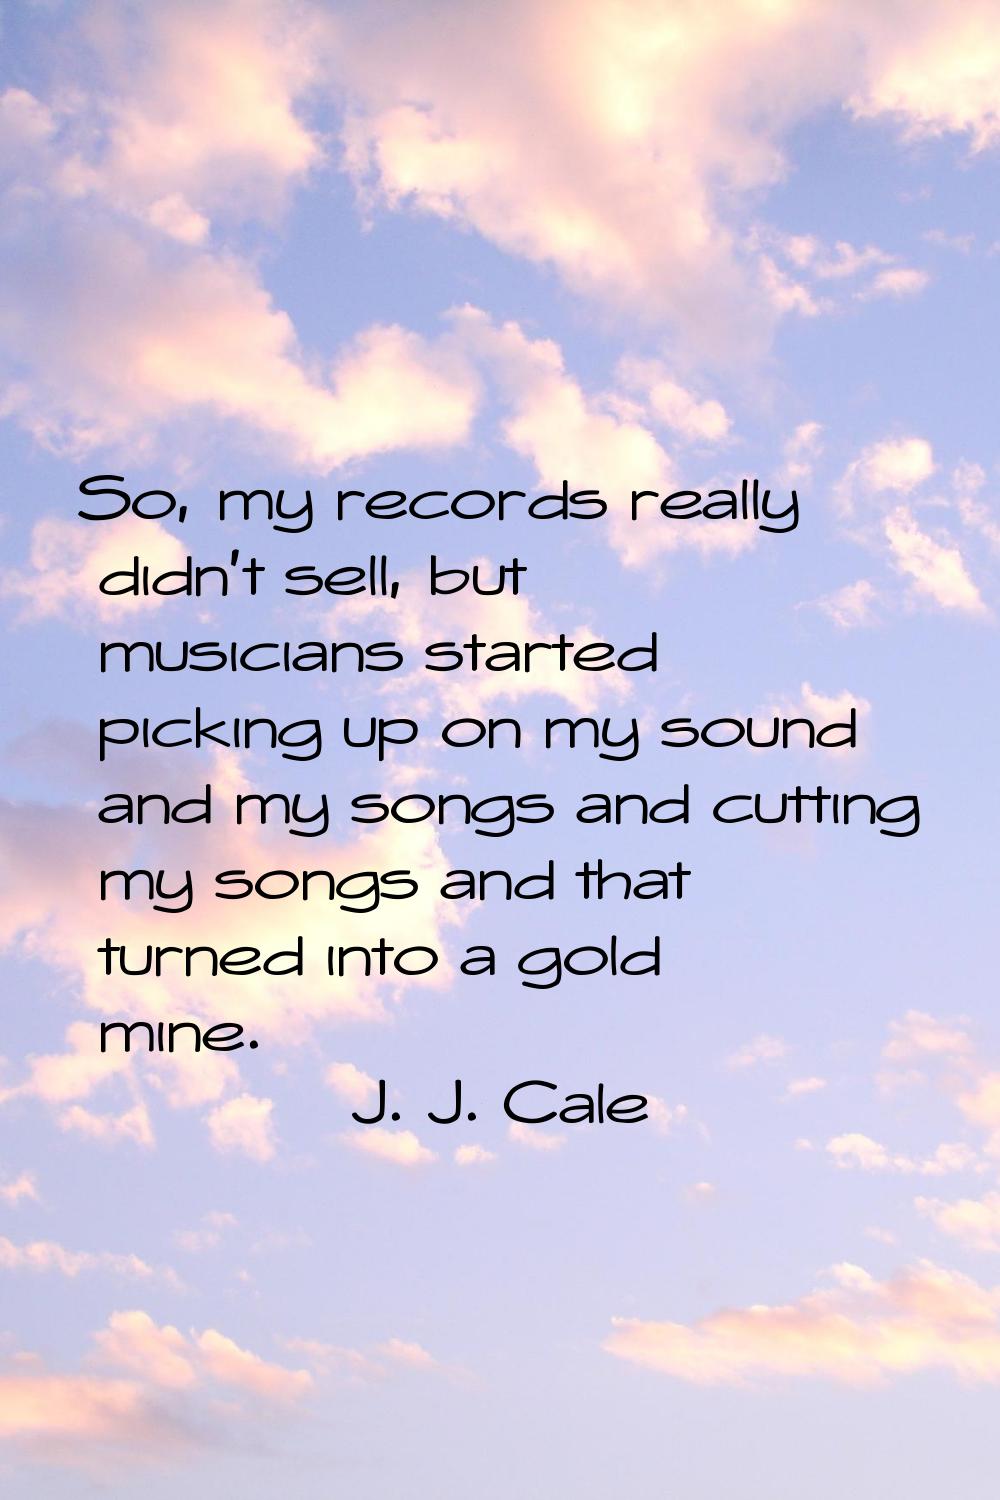 So, my records really didn't sell, but musicians started picking up on my sound and my songs and cu